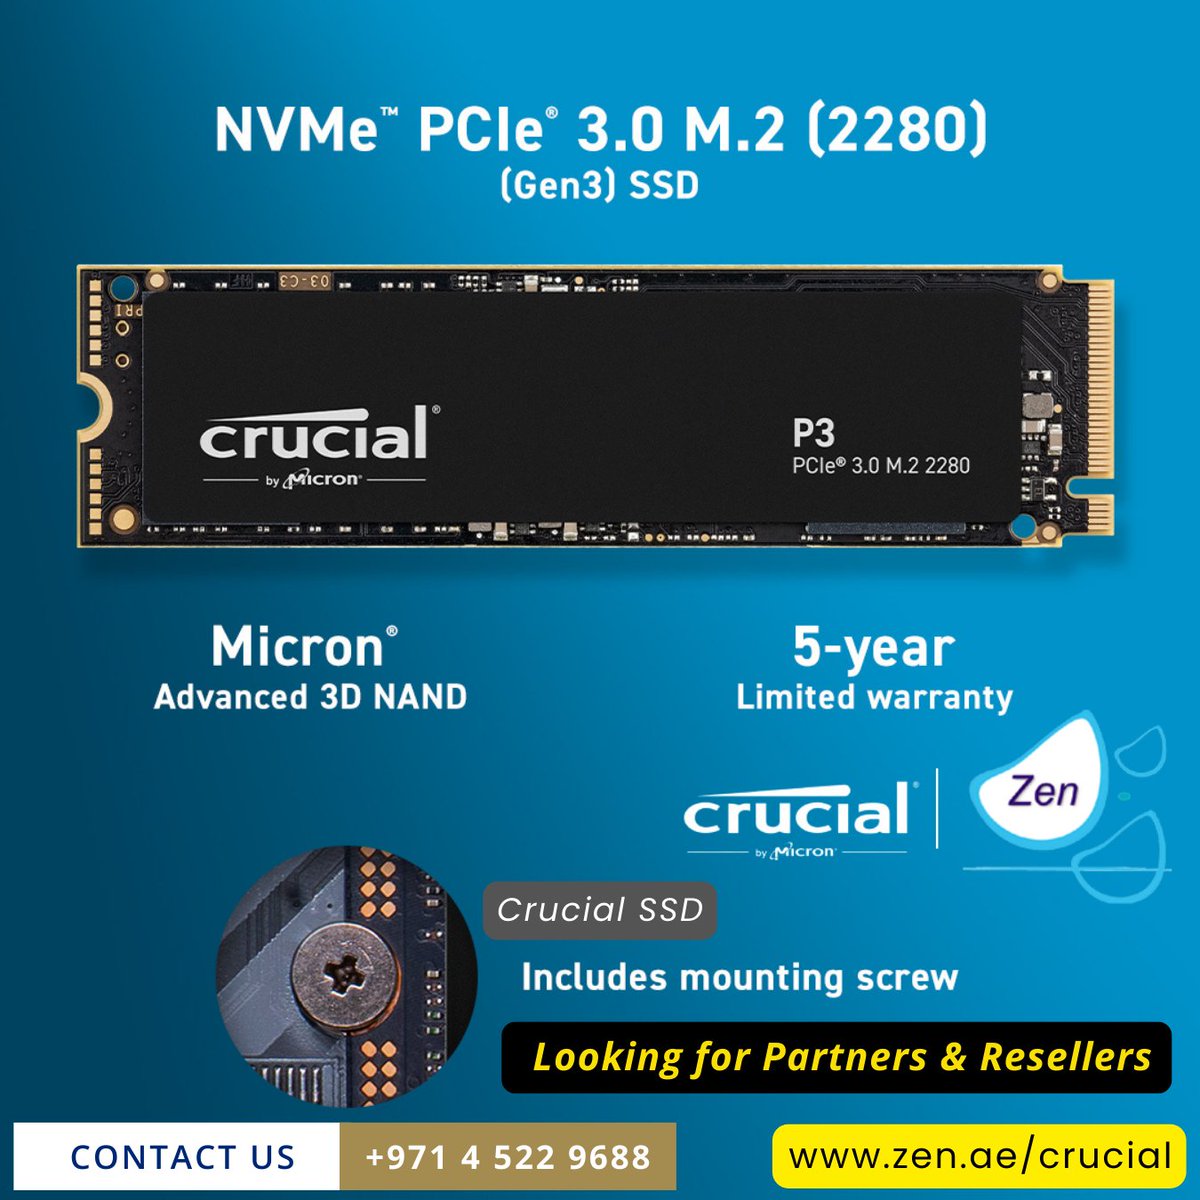 #crucial Crucial SSD

Looking for partners & resellers.

smpl.is/92nwc

#3cx #zenitdxb #zenit #businesscommunication #dubaistartup #3cxhosting #simhosting #saudistartups